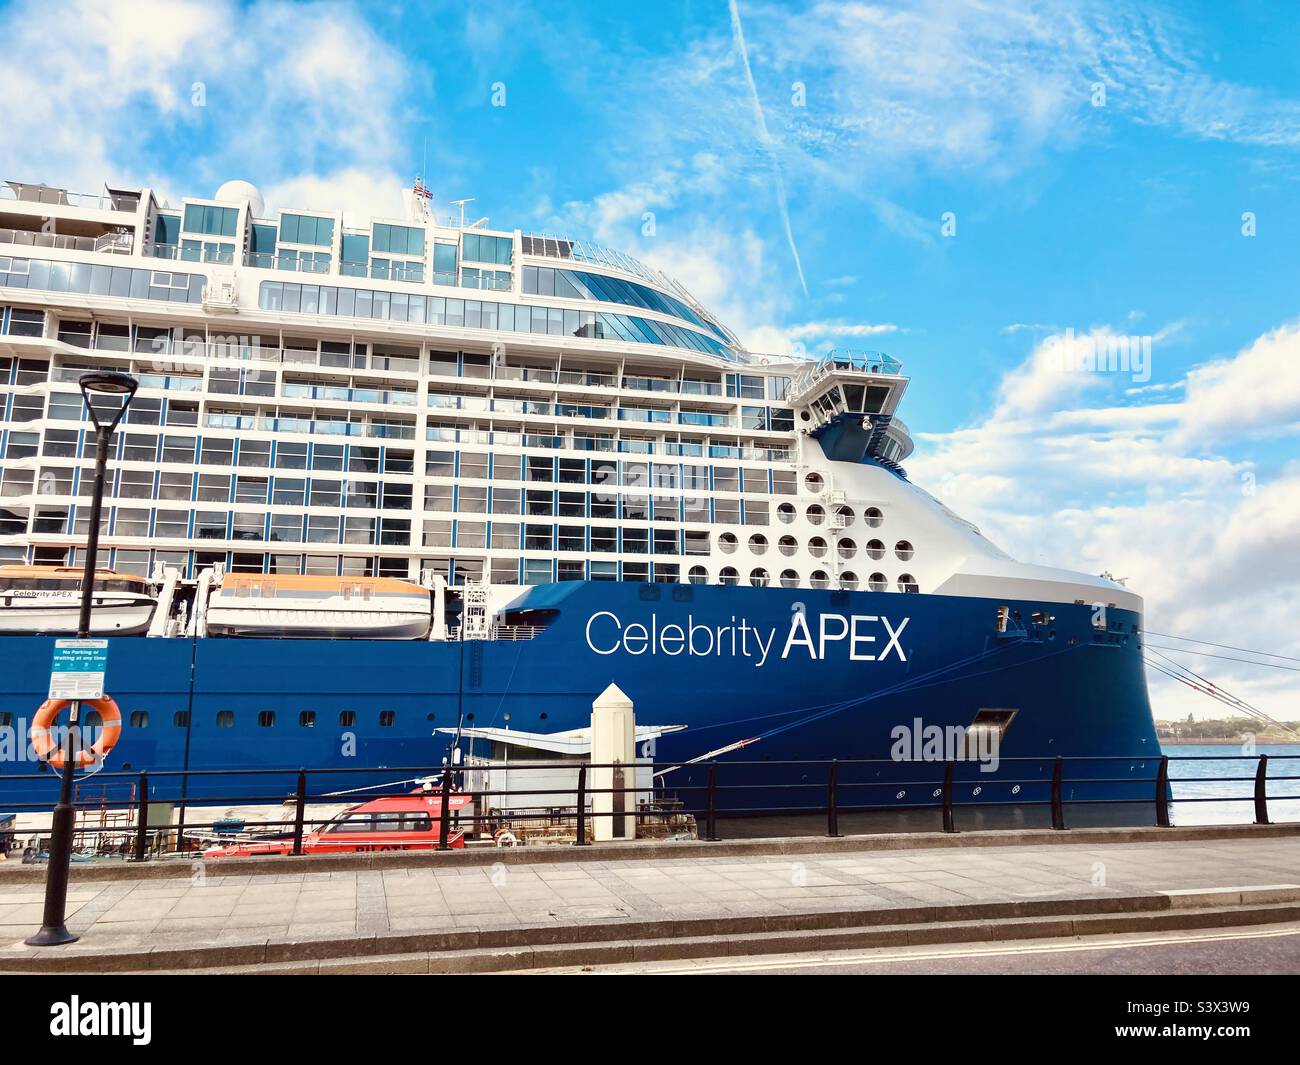 Celebrity Apex cruise liner berthed at Liverpool Stock Photo